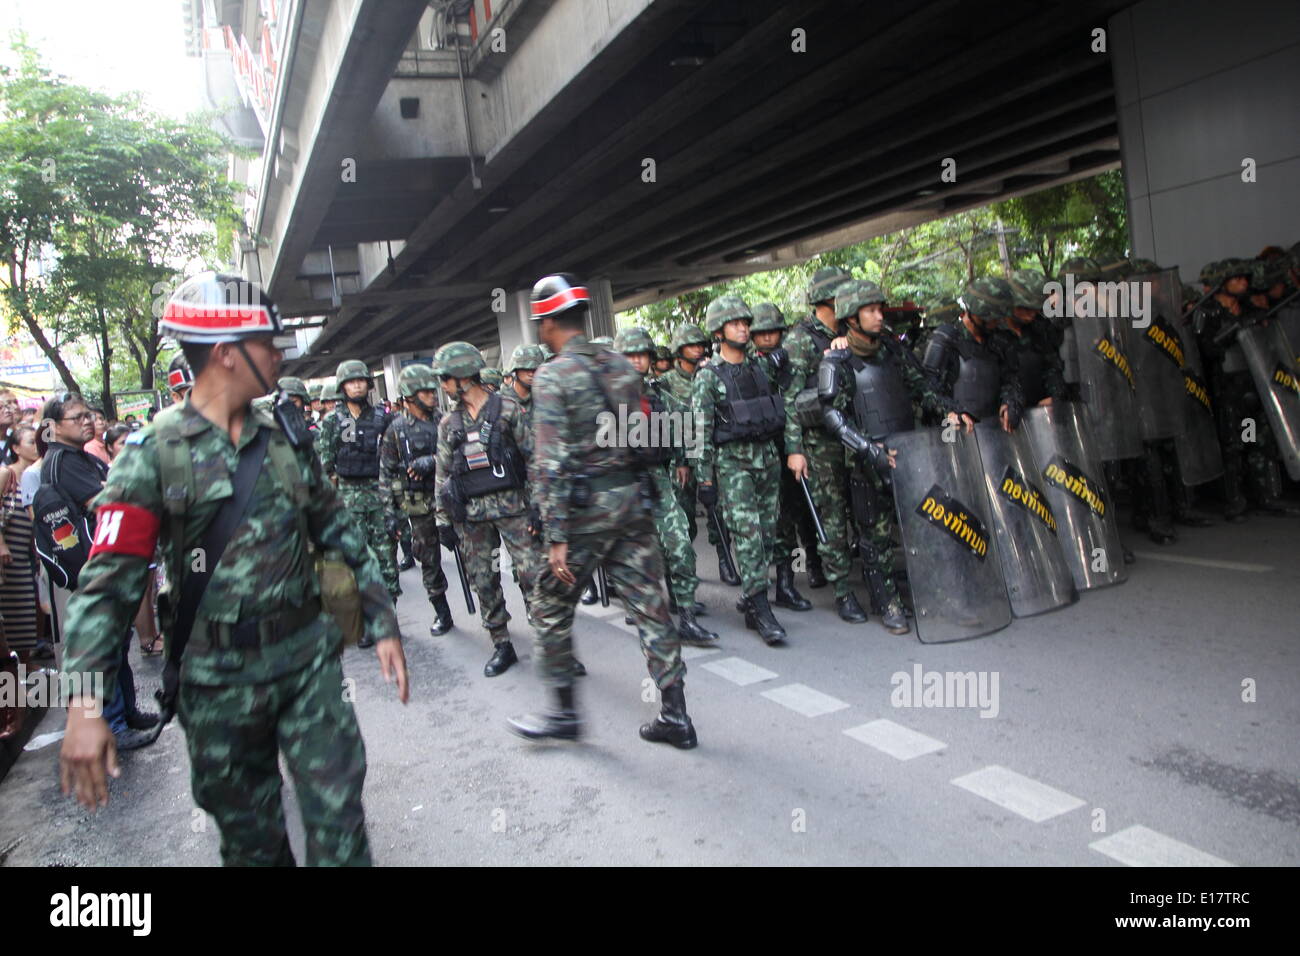 Bangkok, Thjailand. 25th May 2014. Several hundred protesters gathered in central Bangkok, defying a martial law decree that prohibits public assembly. The Thai armed forces seized power in the May 22 coup after months of street protests and political unrest. Credit:  John Vincent/Alamy Live News Stock Photo